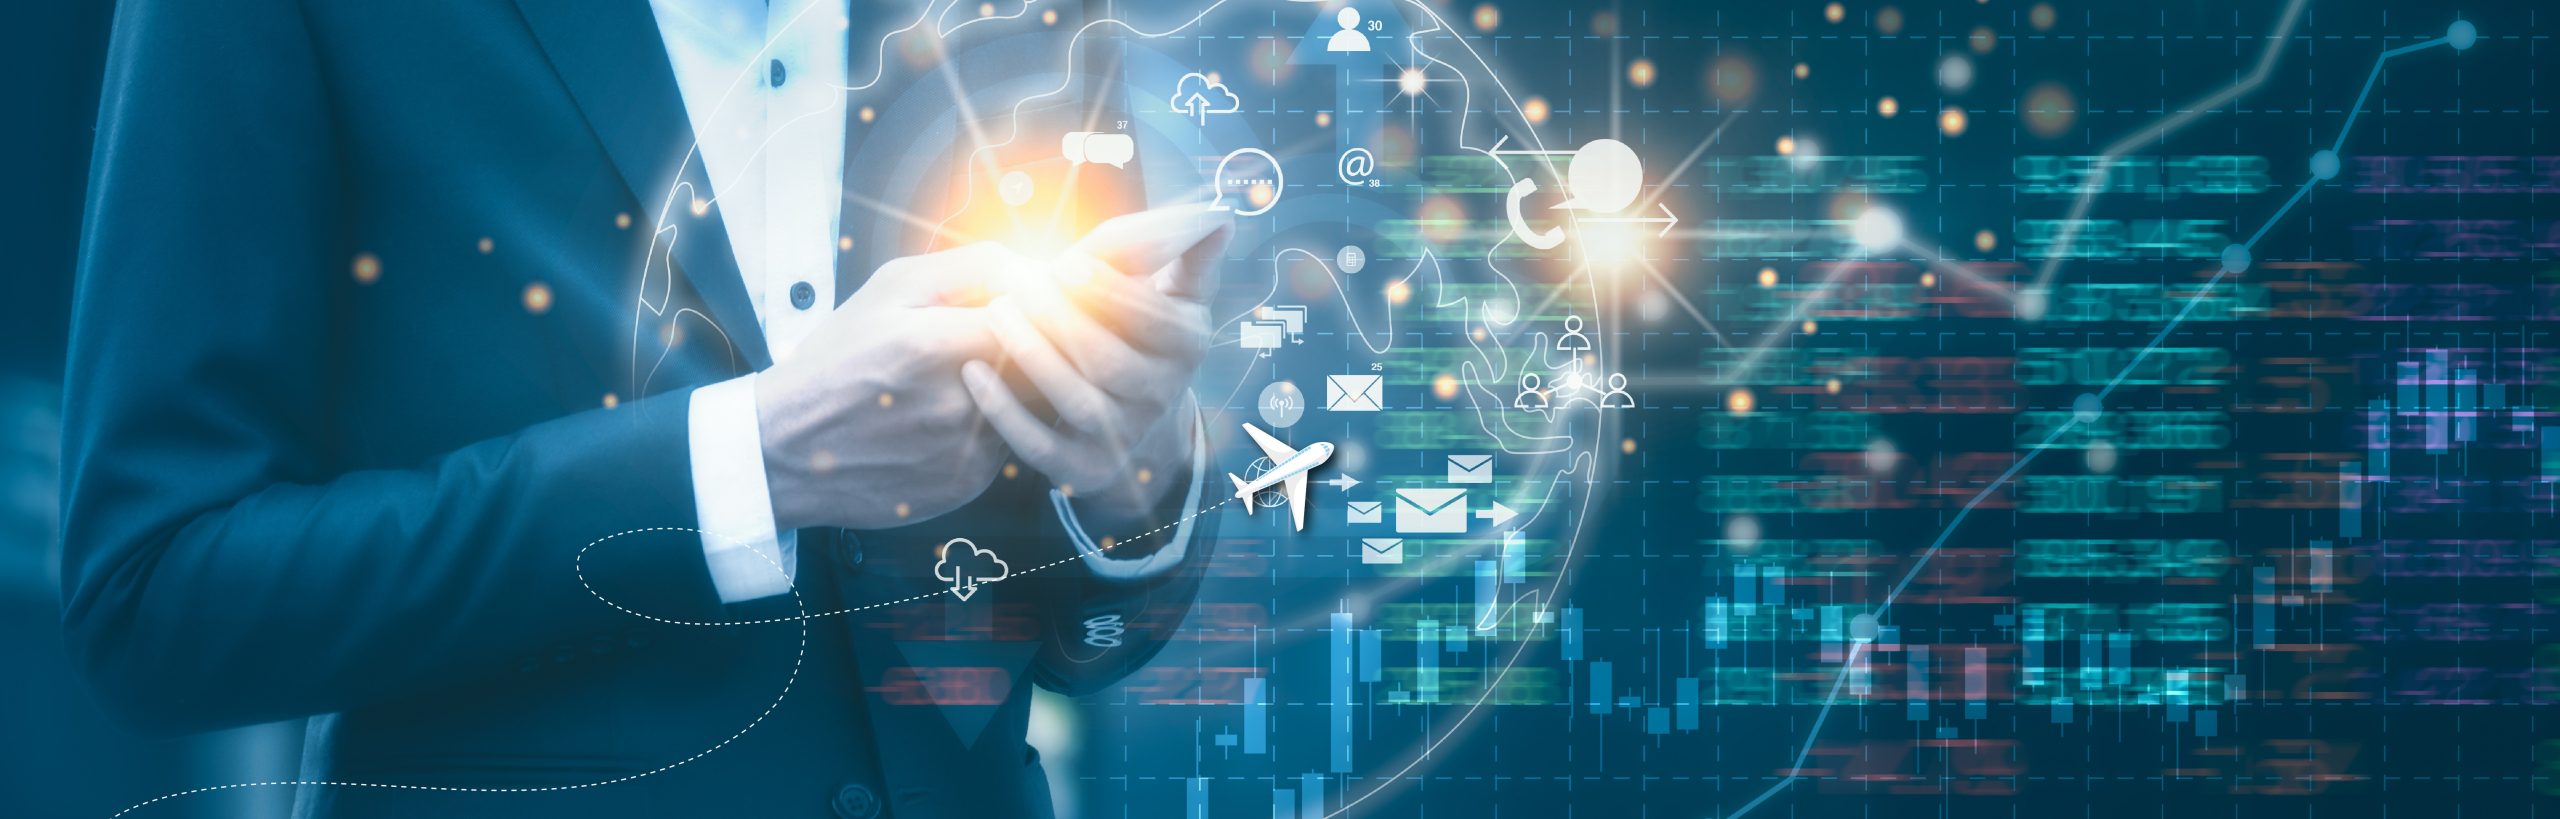 <strong>Big Data in Travel Industry: How Technology is Driving Better Customer Experience</strong> 